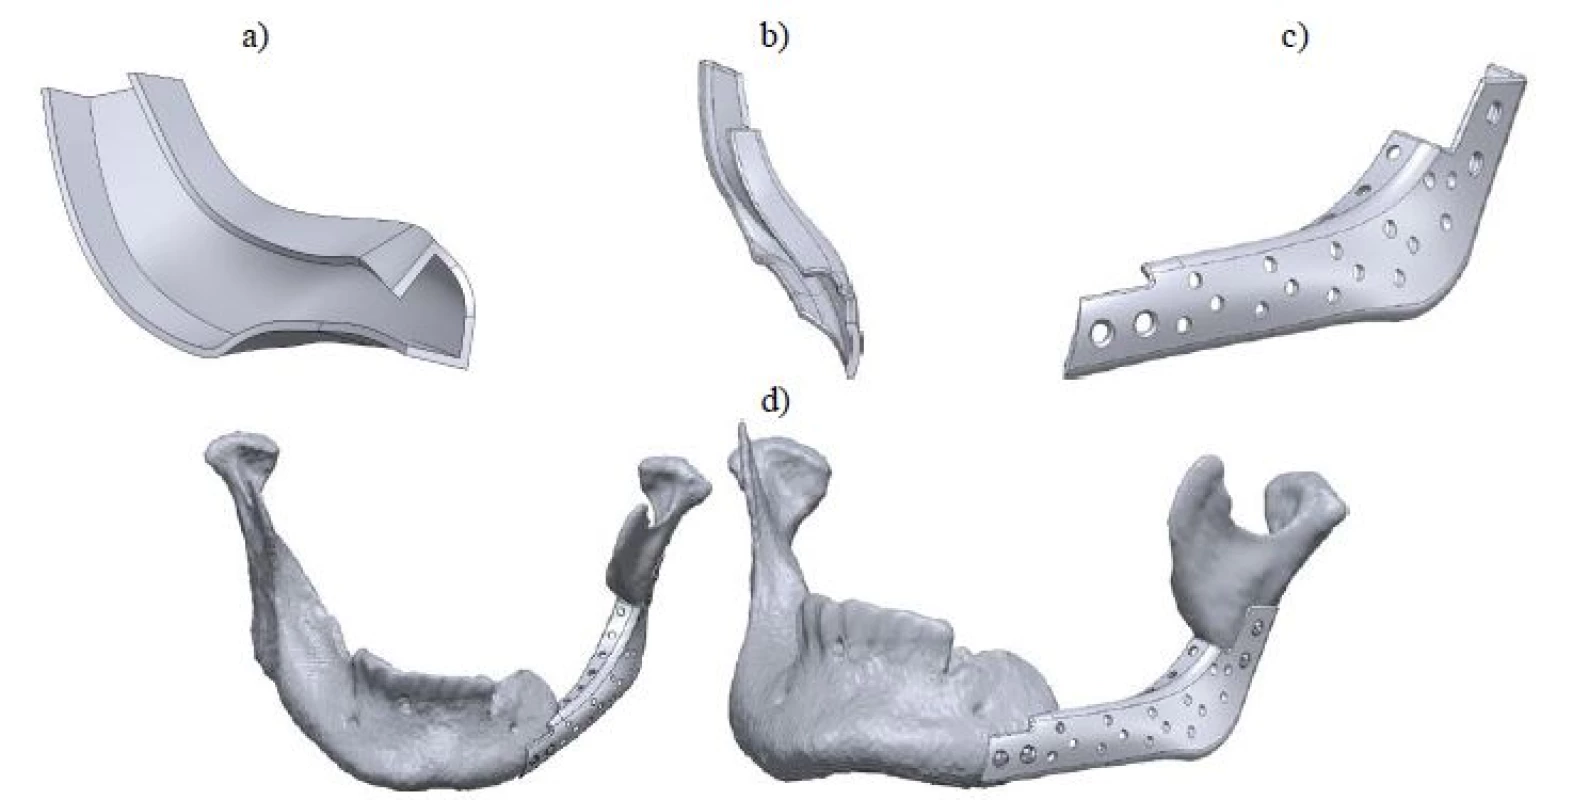 Modeling procedure of the mandibular implant showing a) hollowed shell by 1mm thickness, b) fixation support, c) perforated mandibular implant and d) mounted implant on the reconstruction site, fixed with 4 titanium screws.